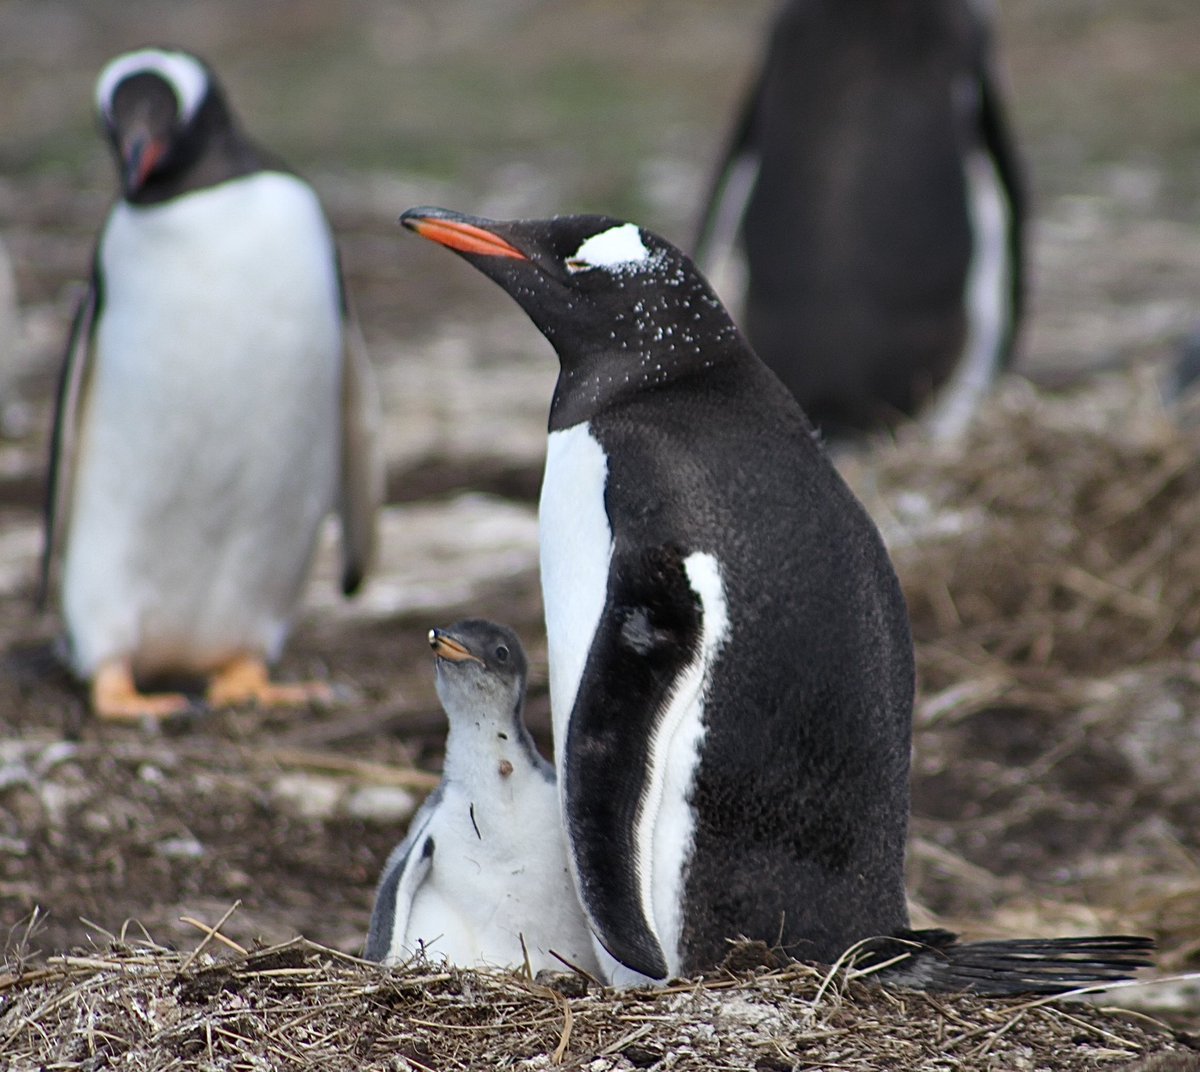 Gentoo floof with their adorable baby 🥰

It’s Thursday! We are nearly there peeps! Hang on in there… we can make Friday!! 😁

#gentoo #falklands #penguins #falklandislands #floofs #floofies #birds #oceanpollution #saveouroceans